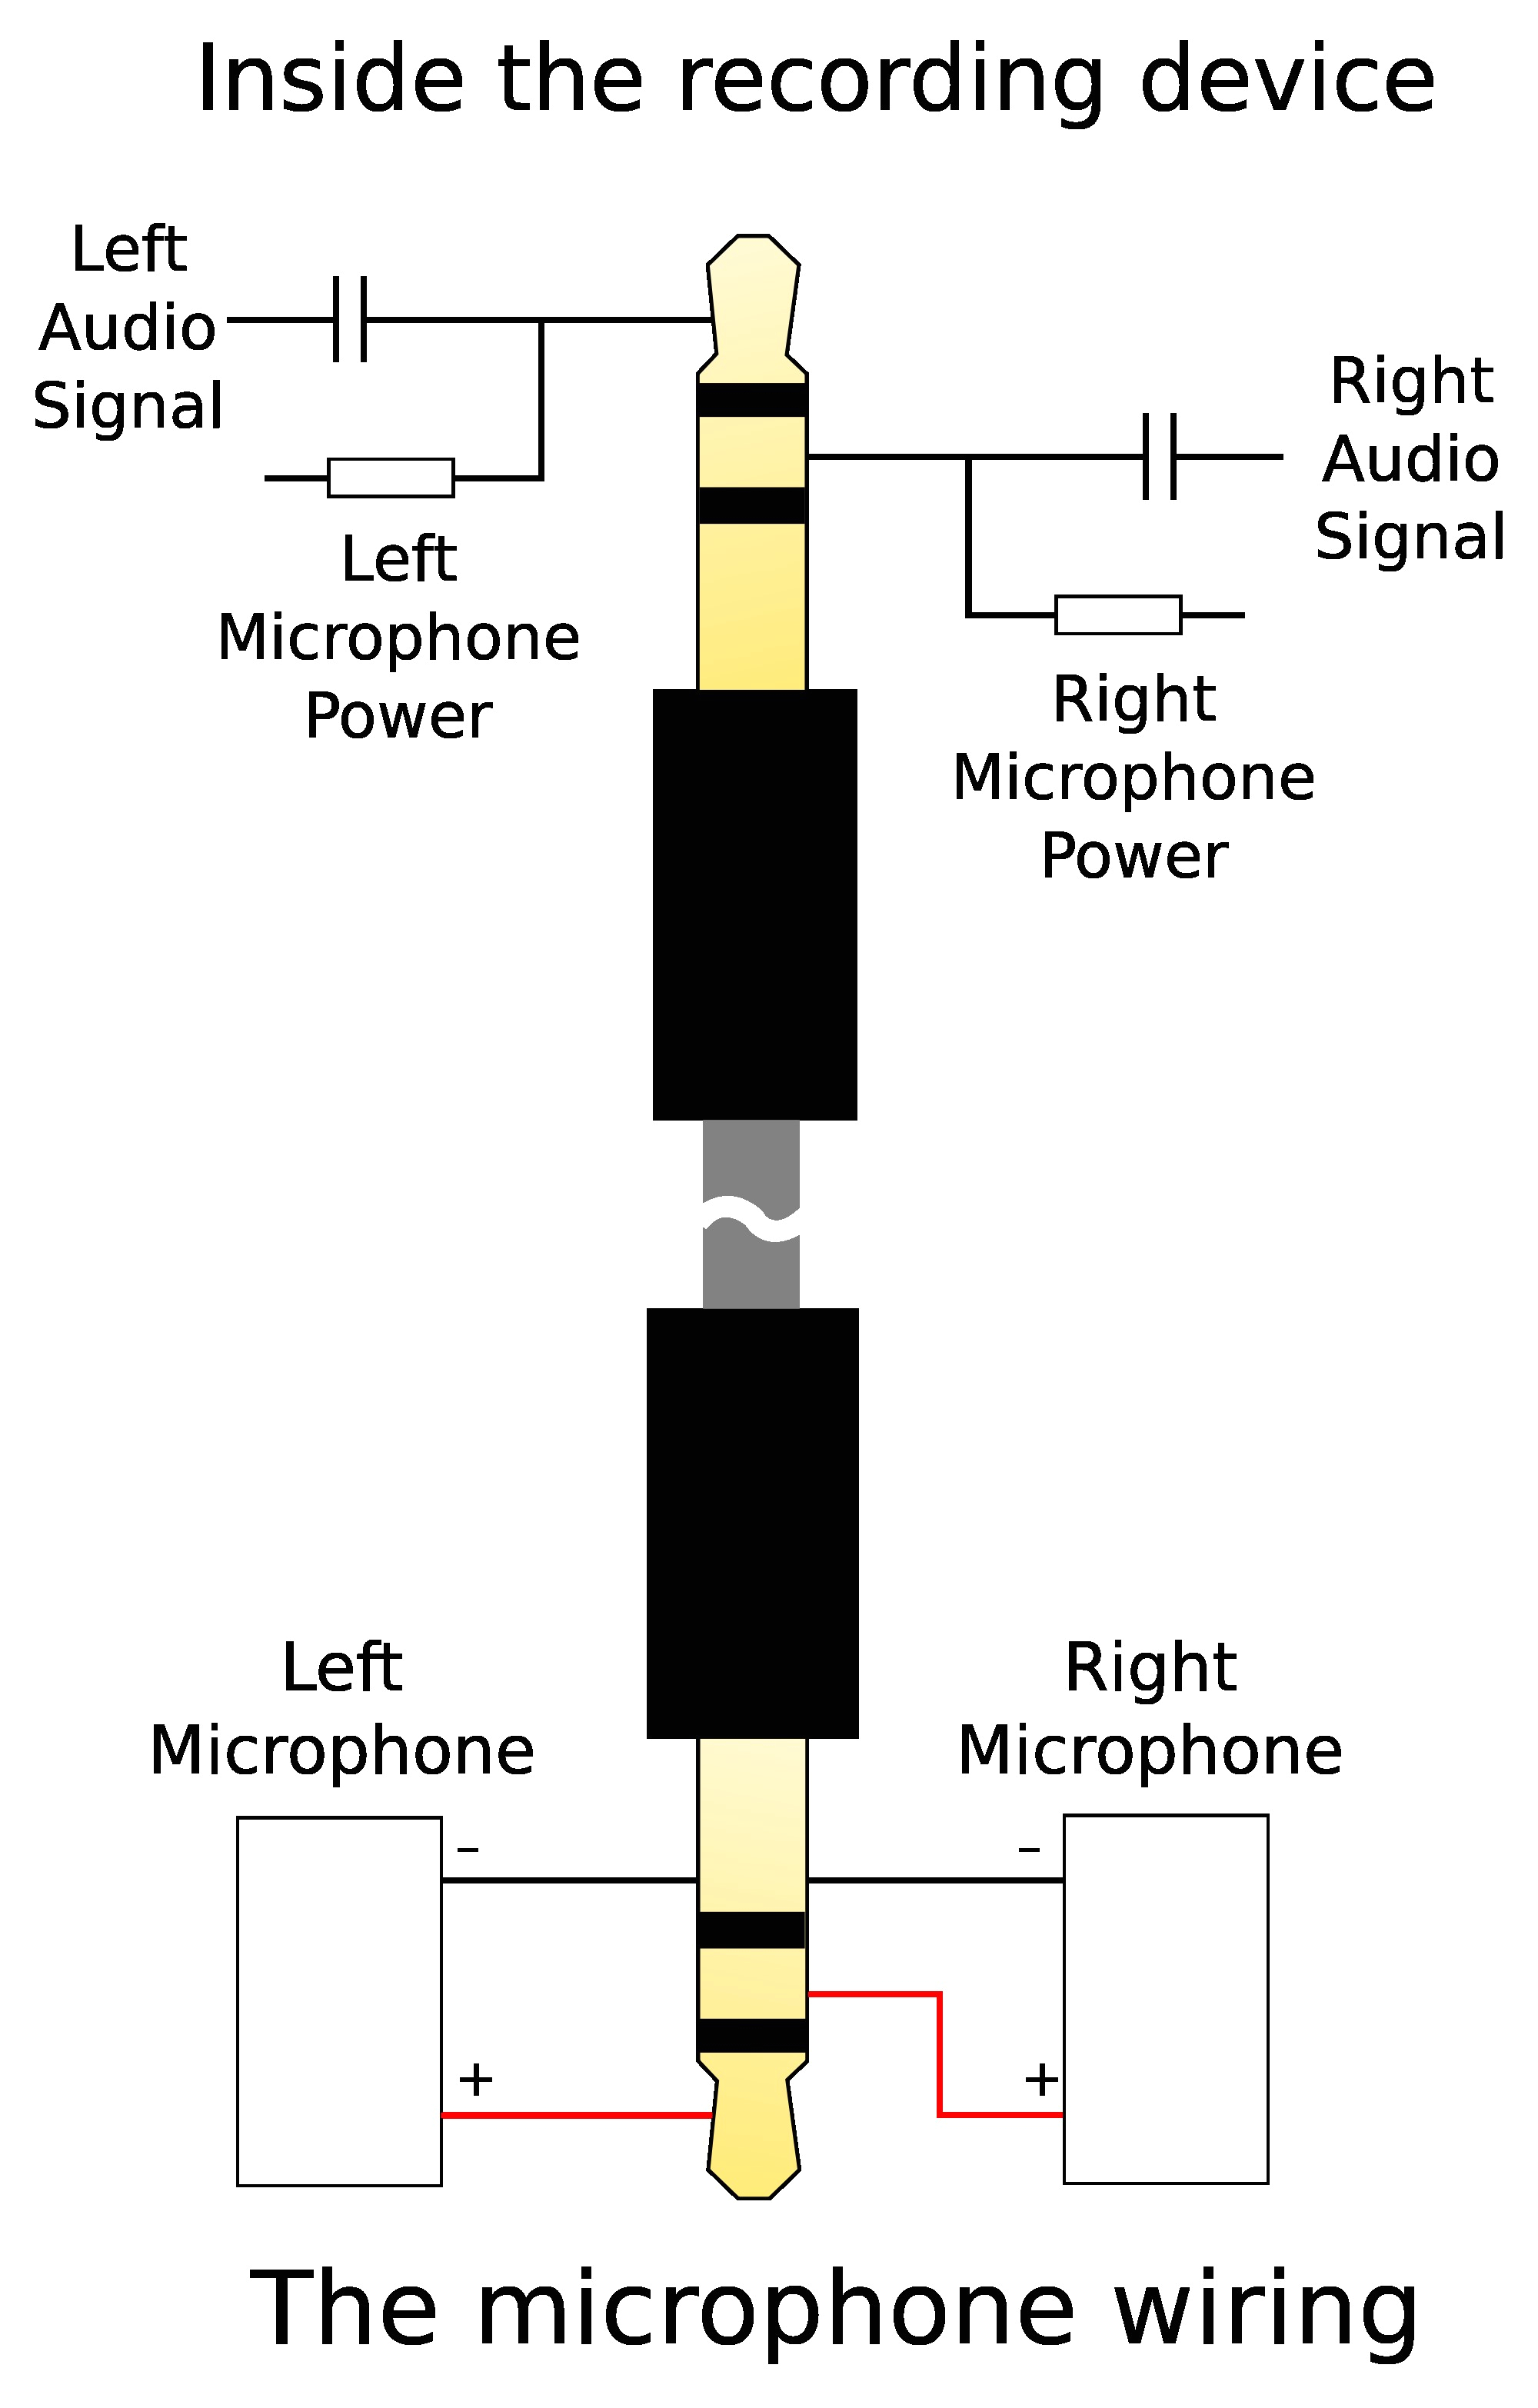 mini plug wiring diagram on images free download diagrams inside within 3 5mm jack for 35 mm audio cable wiring diagram jpg